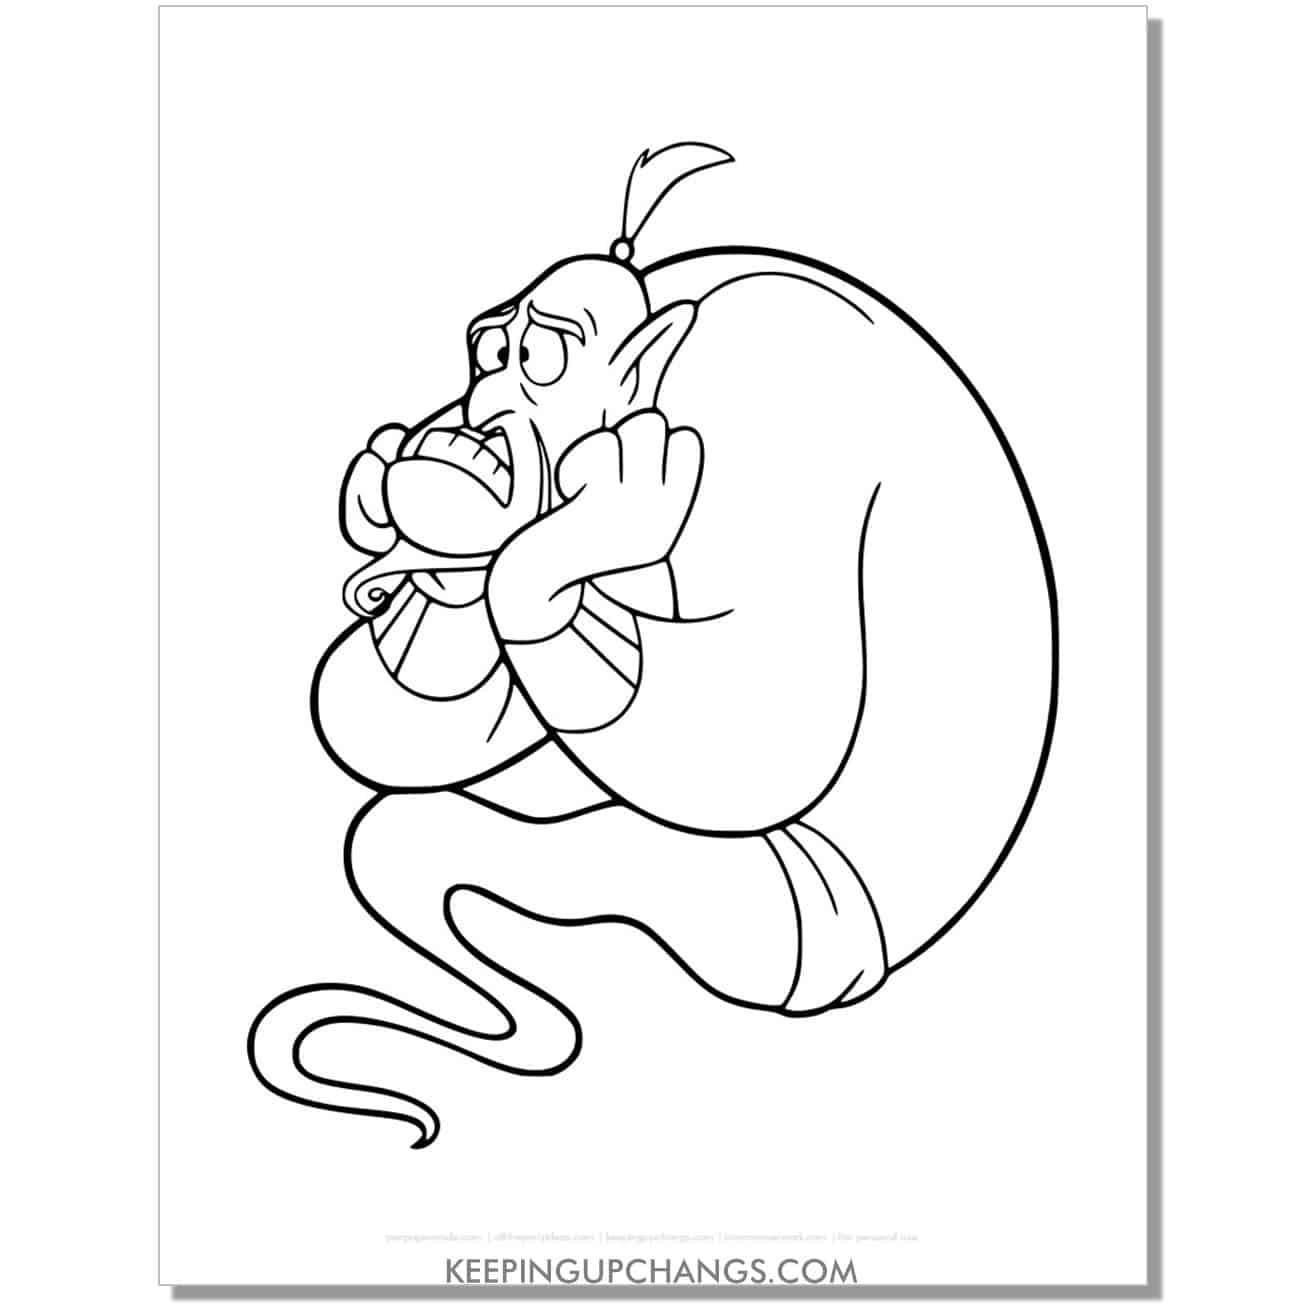 aladdin genie with look of concern coloring page, sheet.